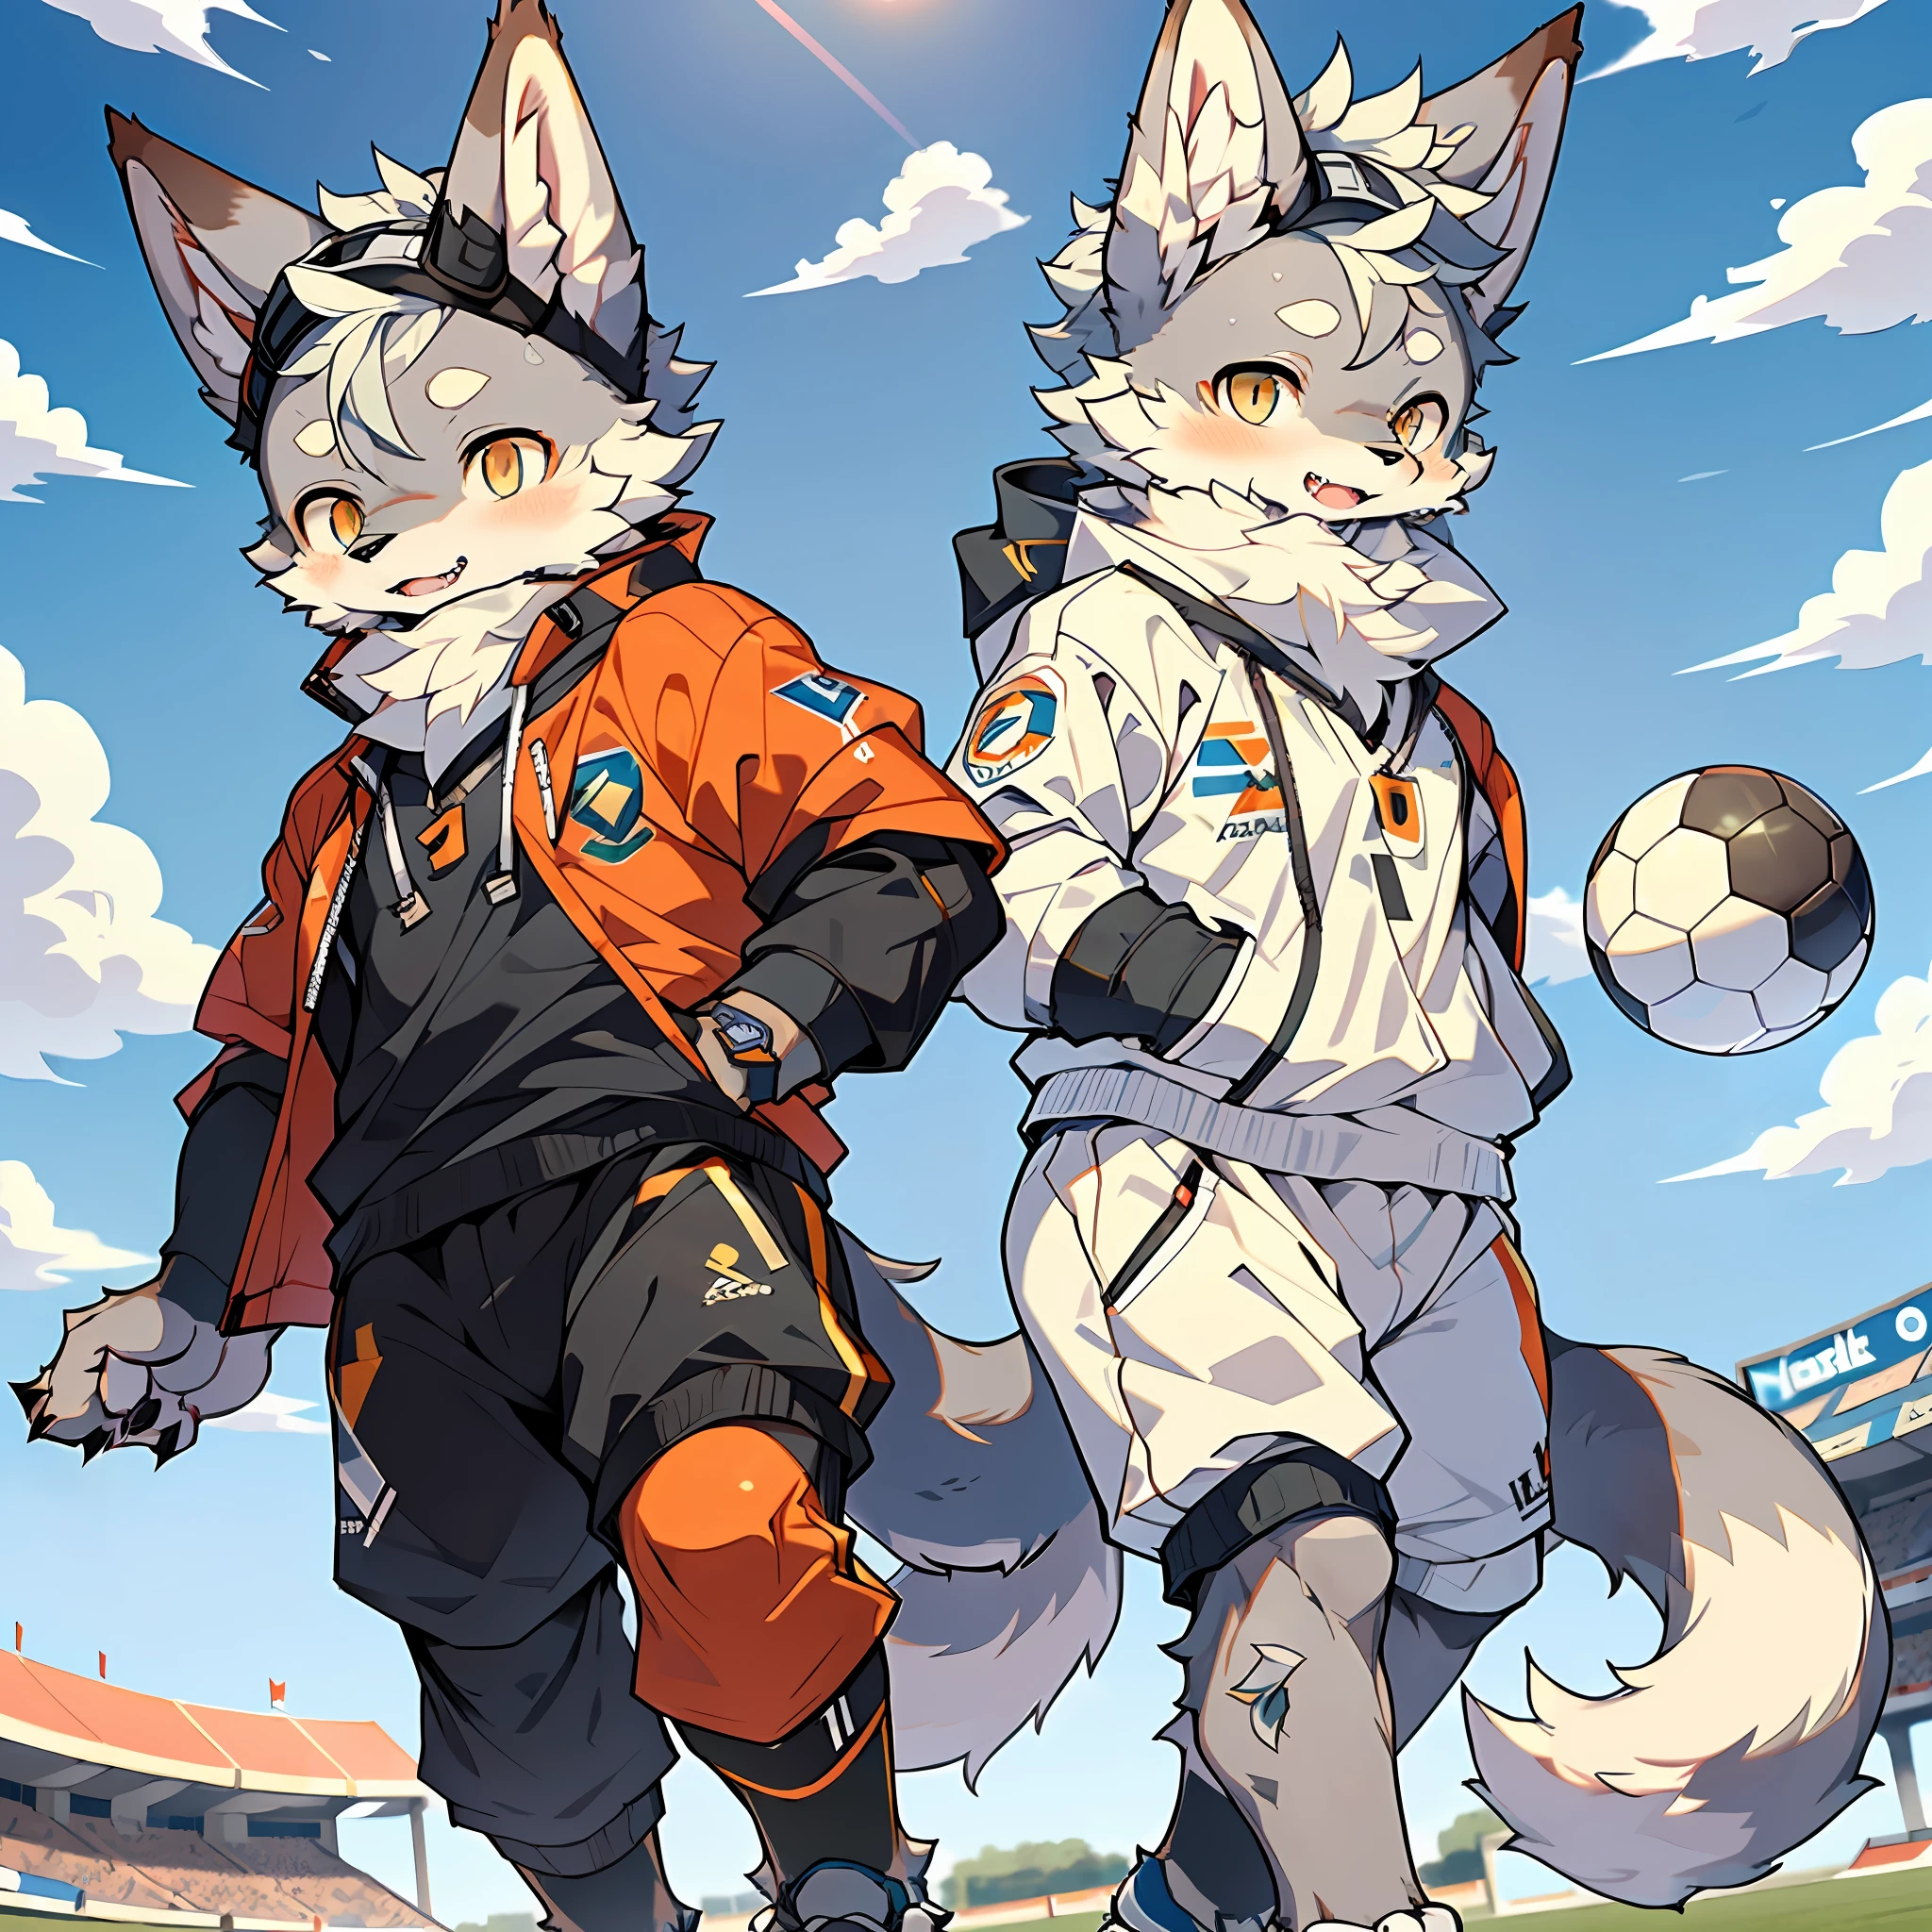 (Best Quality), (Masterpiece), ((Solitary), (Ultra Detailed), (Furry), Full Body Furry, Furry, (Male Arctic Fox: 1.5), (Gray Skin: 1.3), (Fluffy Tail: 1.2), Character Focus, (Golden Eyes), (Canine Paws), (Gray Ears), Sharp Focus, (Furry of Animal Ears), (Sports), ((Wearing a Soccer Suit)), (Playing Soccer))), ((Running)), (Dribble), Sweating, On the football field, detailed background, sunny sky, blue sky and white clouds